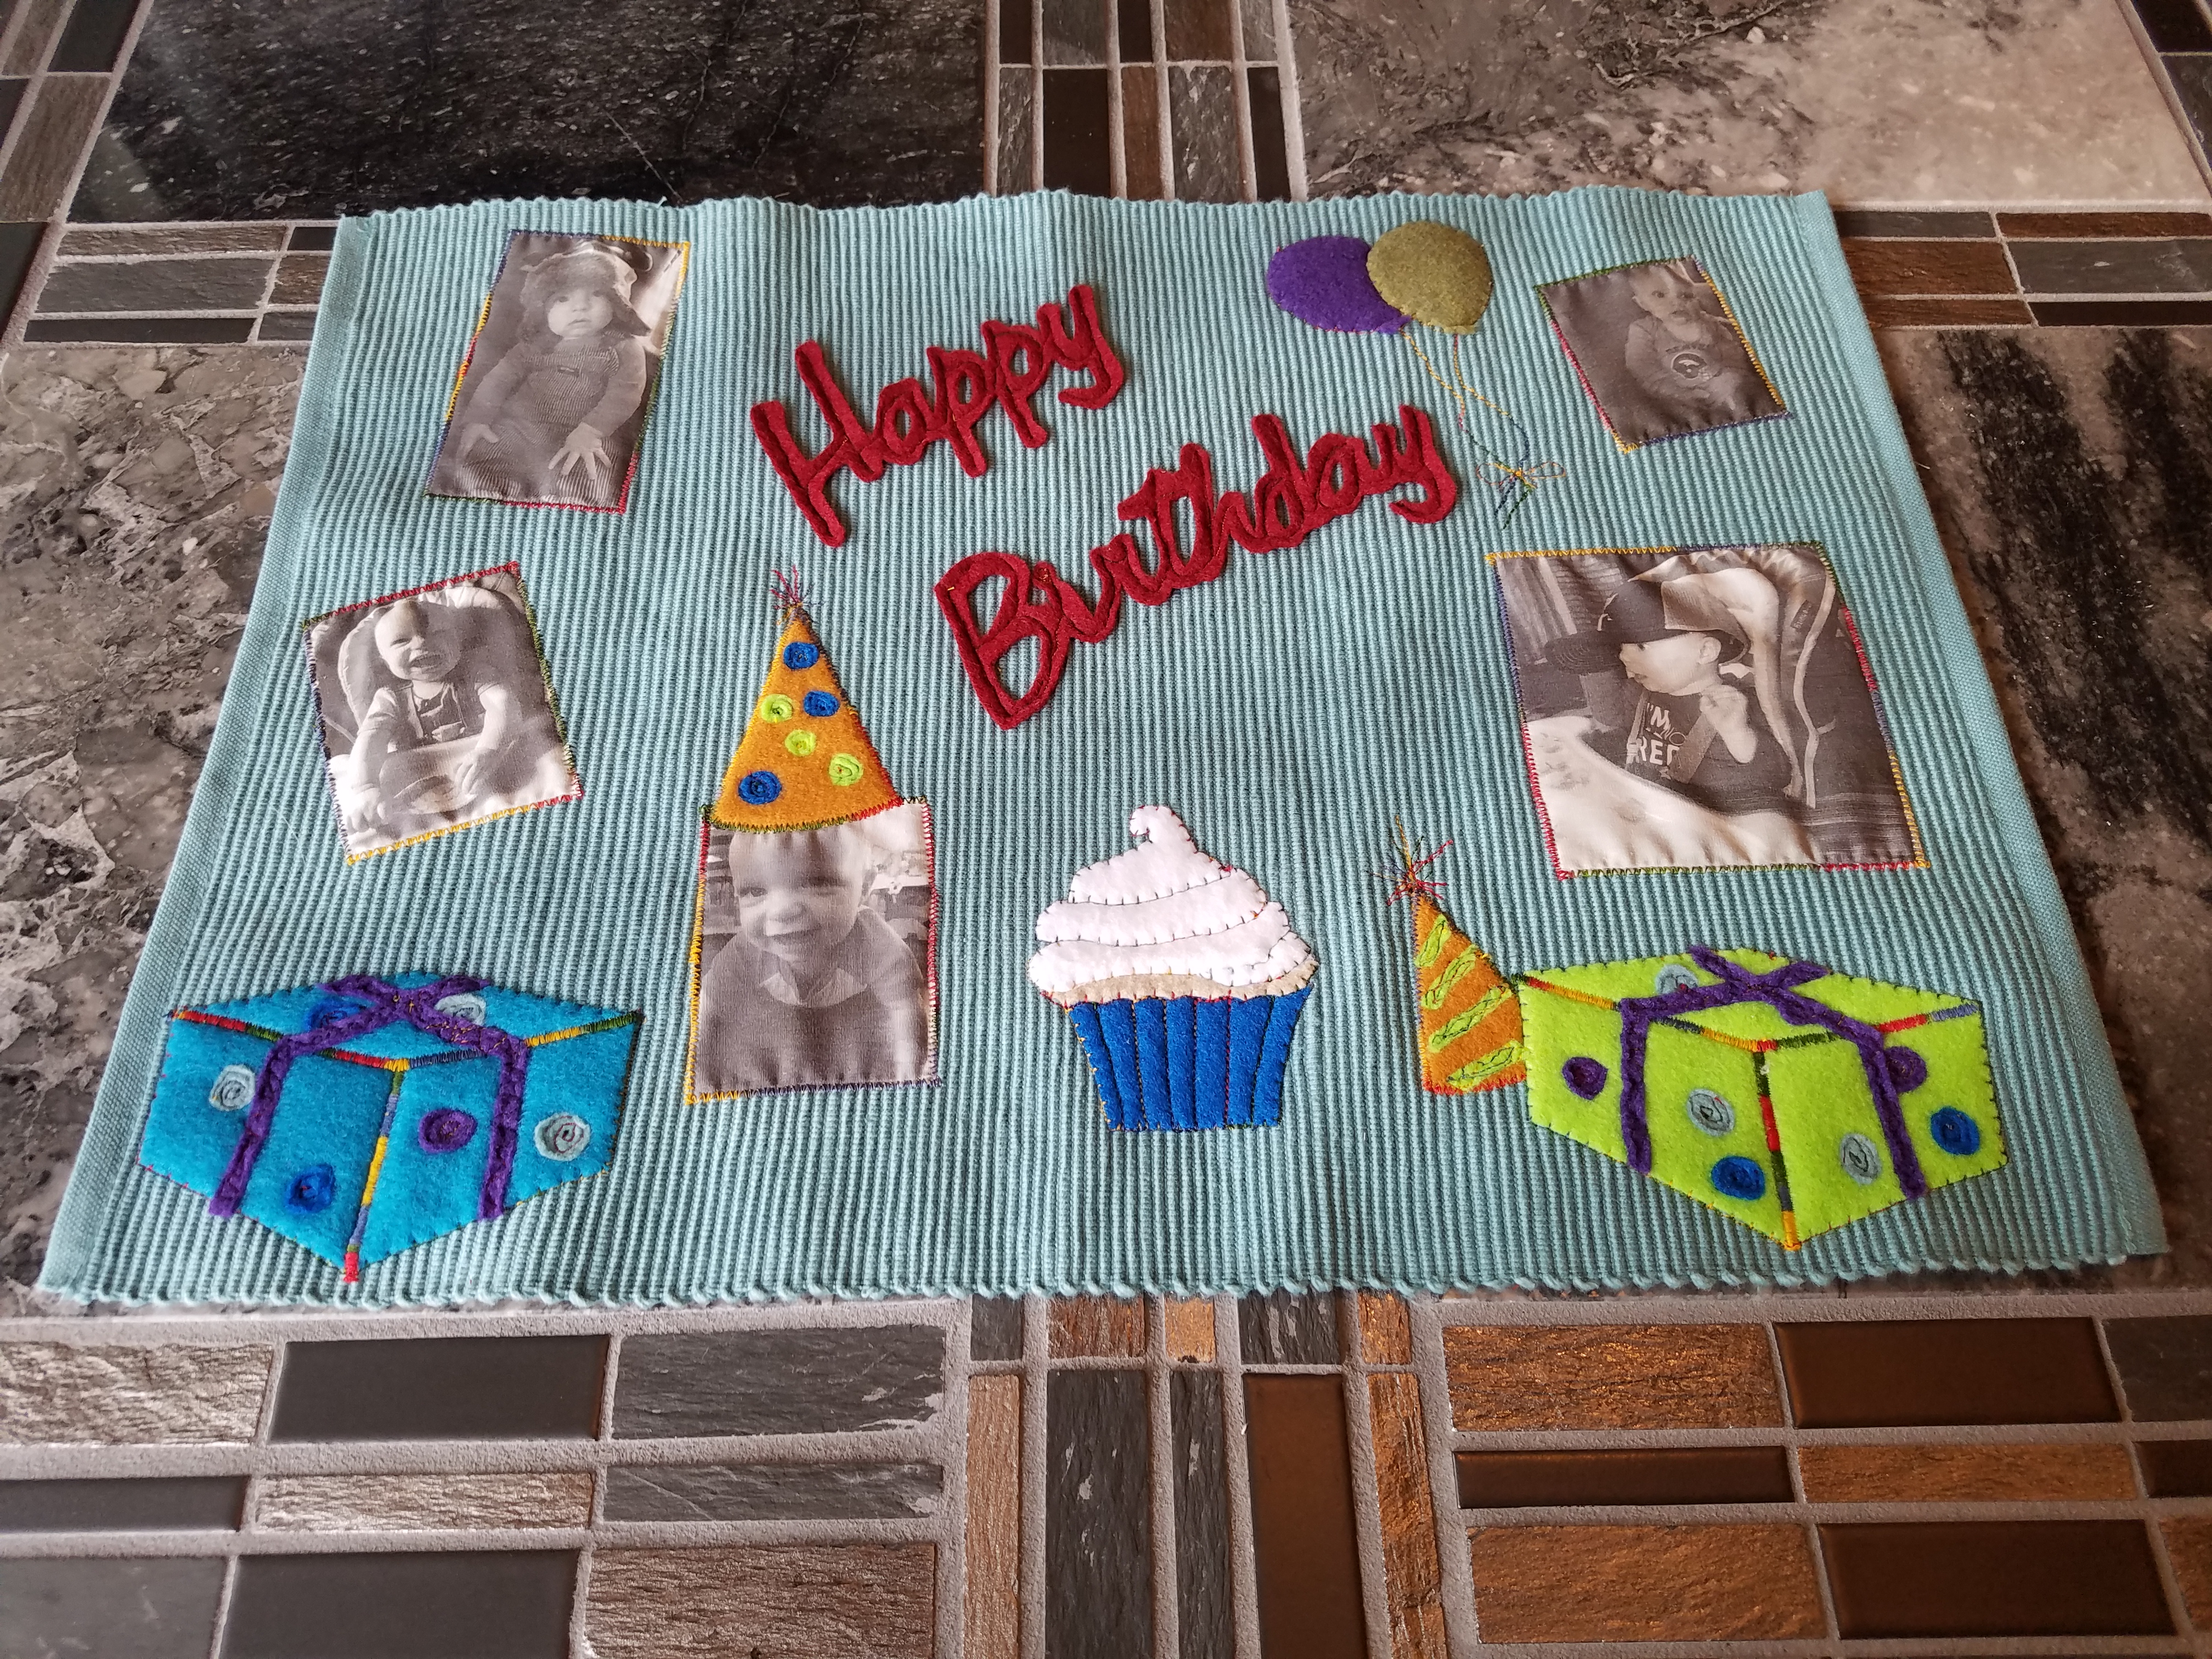 Sewn Happy Birthday placemat